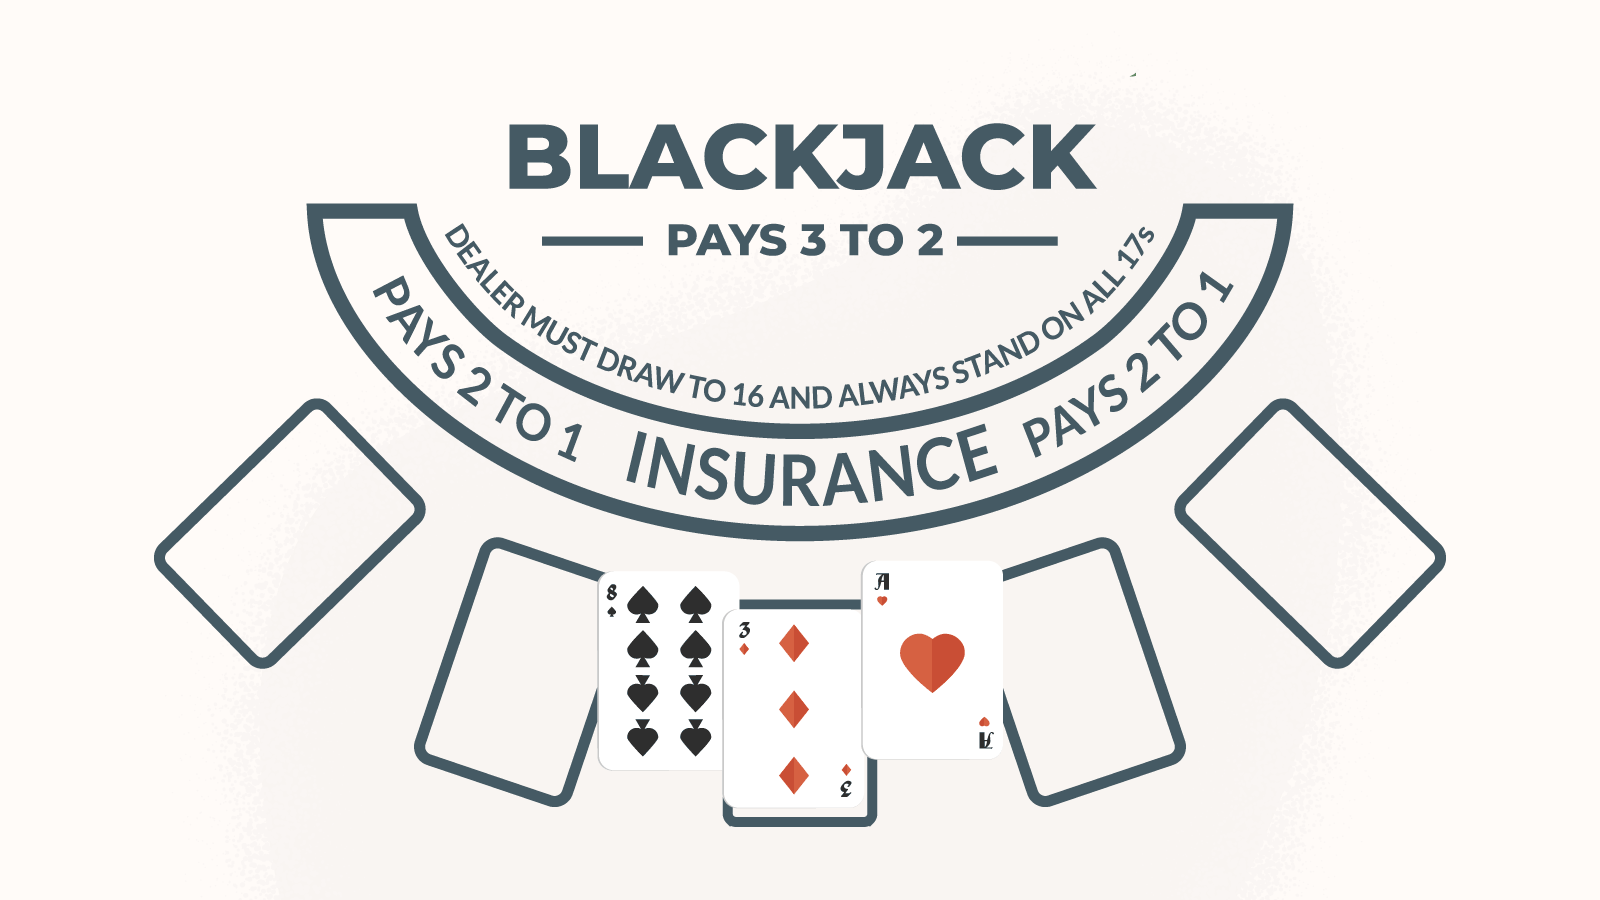 6to5 and 3to2 blackjack rules explained